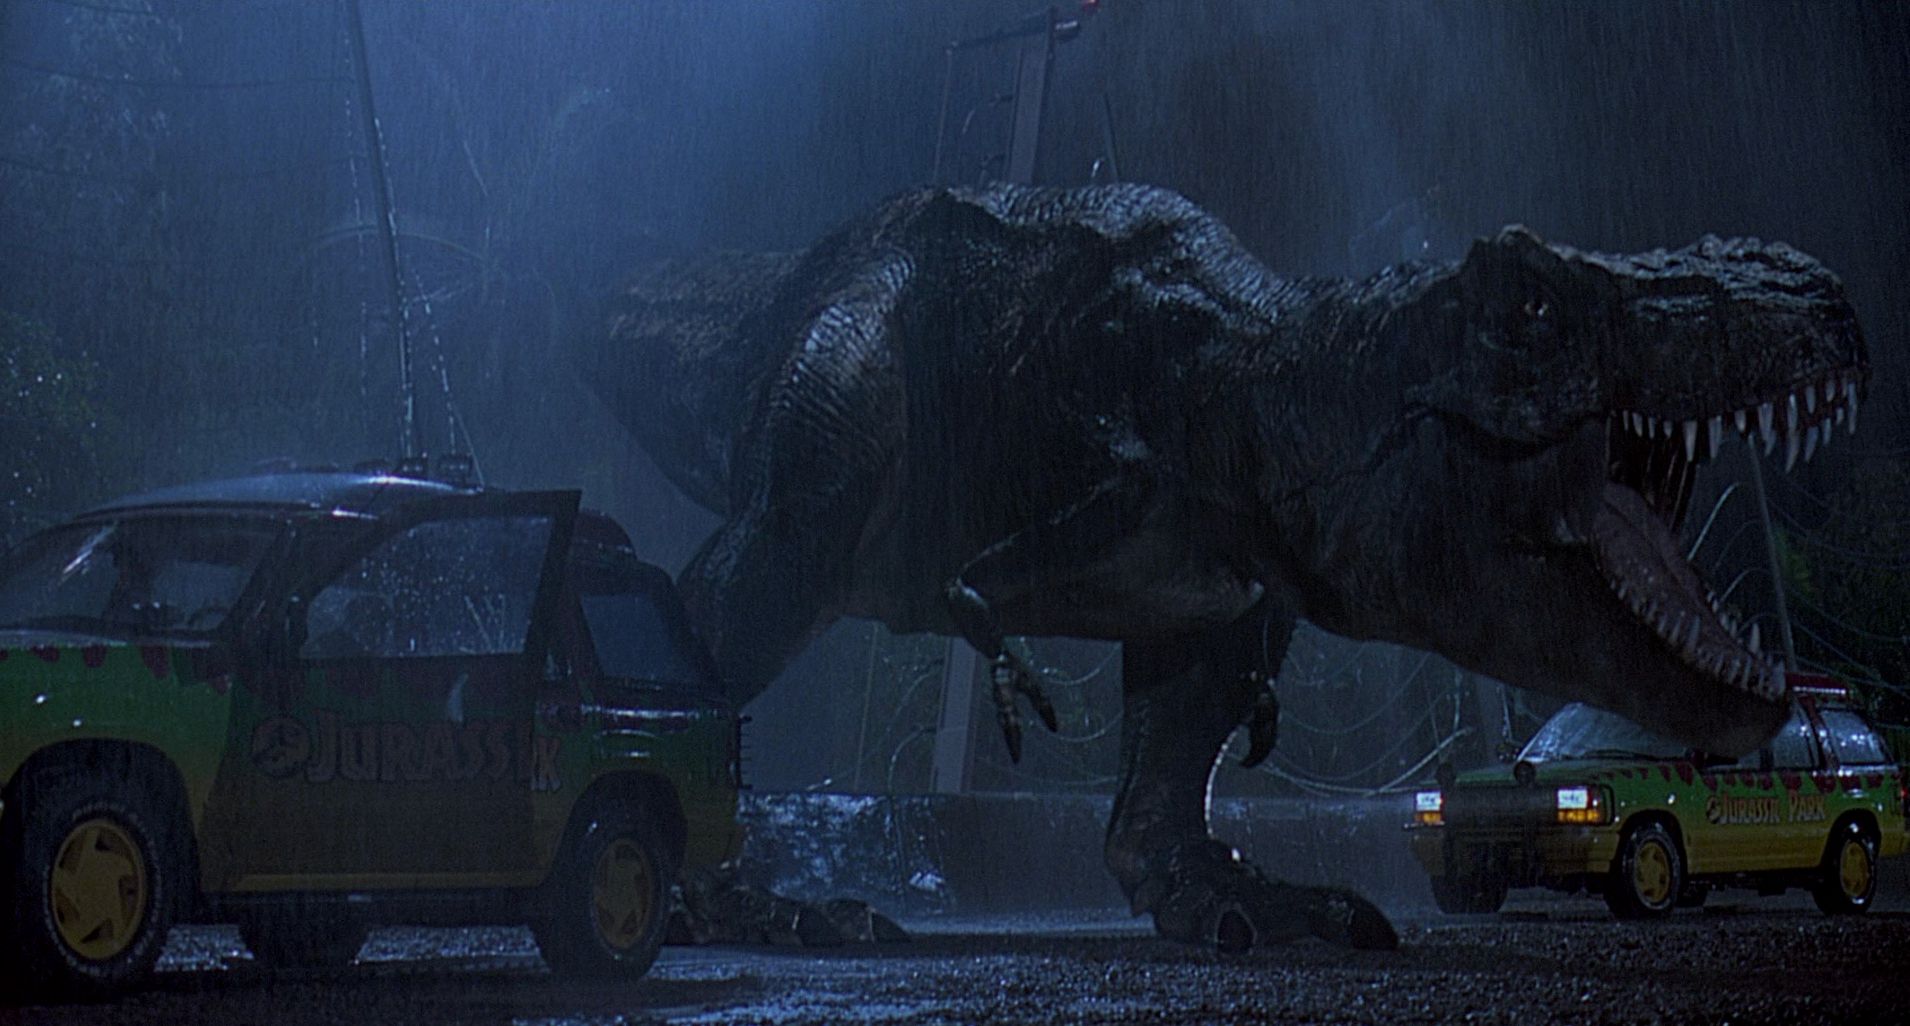 Jurassic Park Dinosaurs: A Complete Guide to Every Creature!